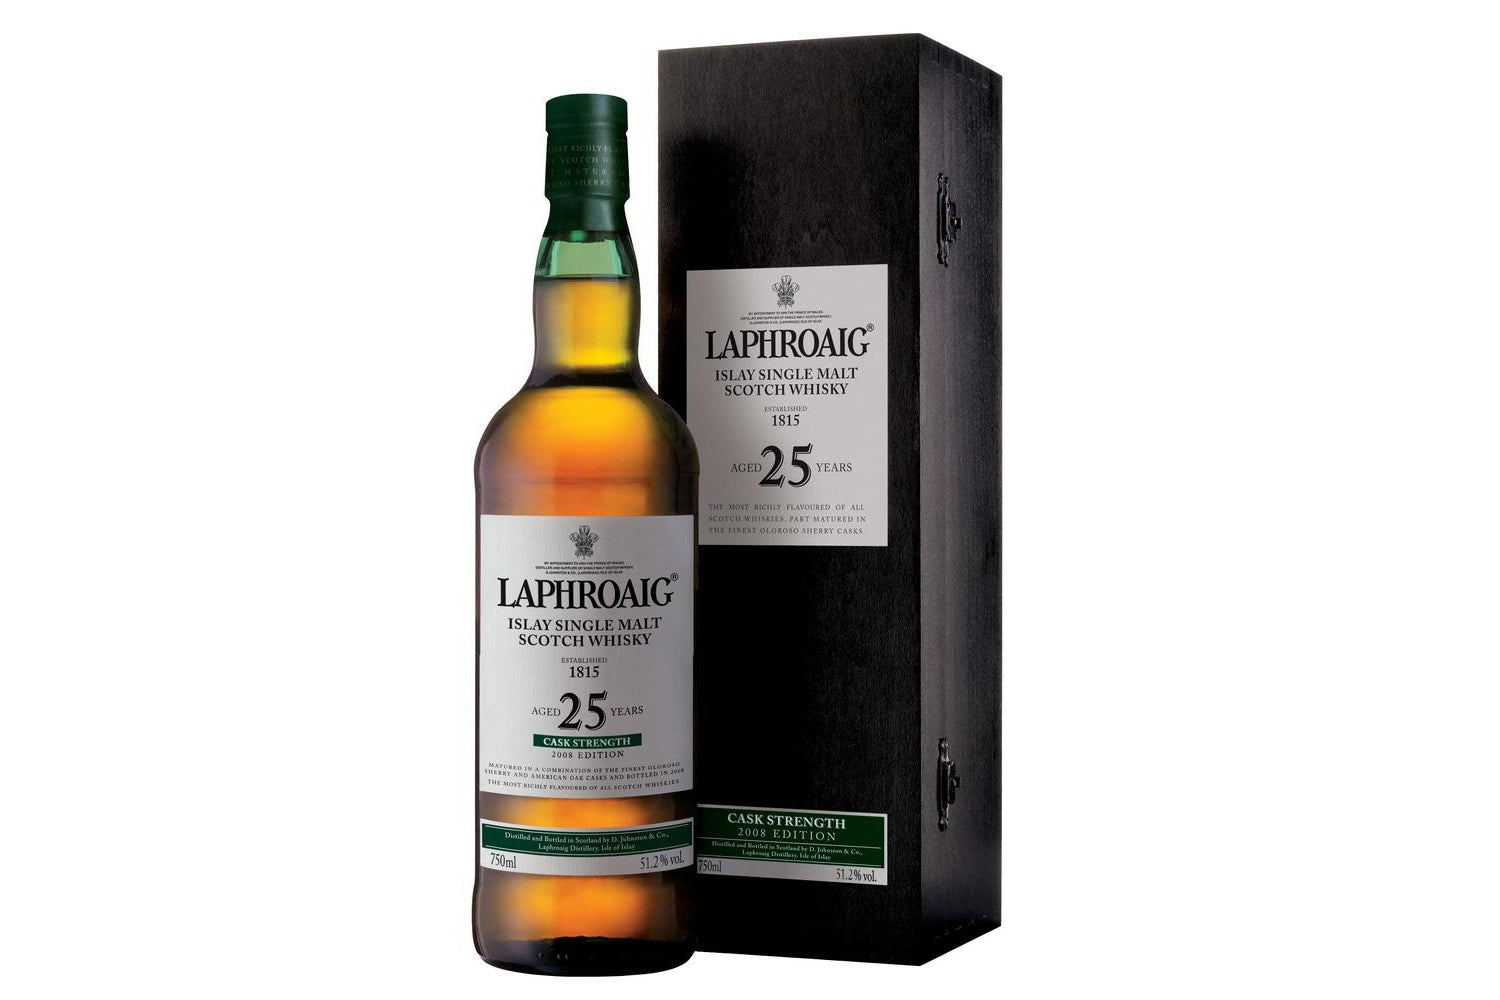 Whisky of the week